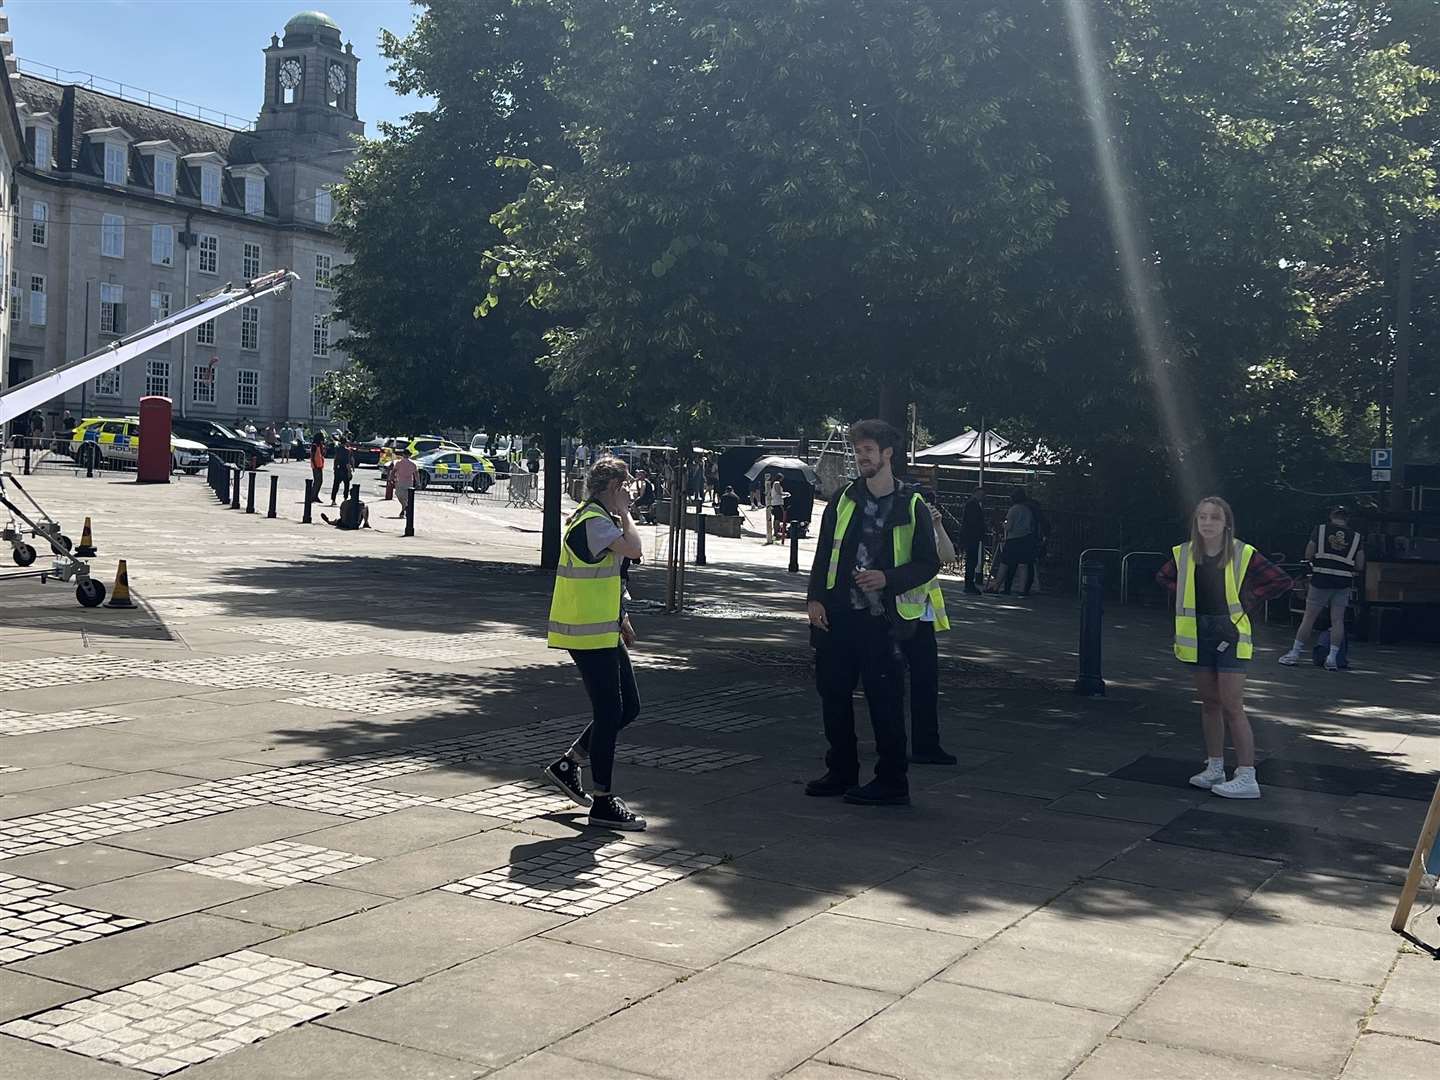 Netflix filmed scenes outside of Sessions House in Maidstone in June